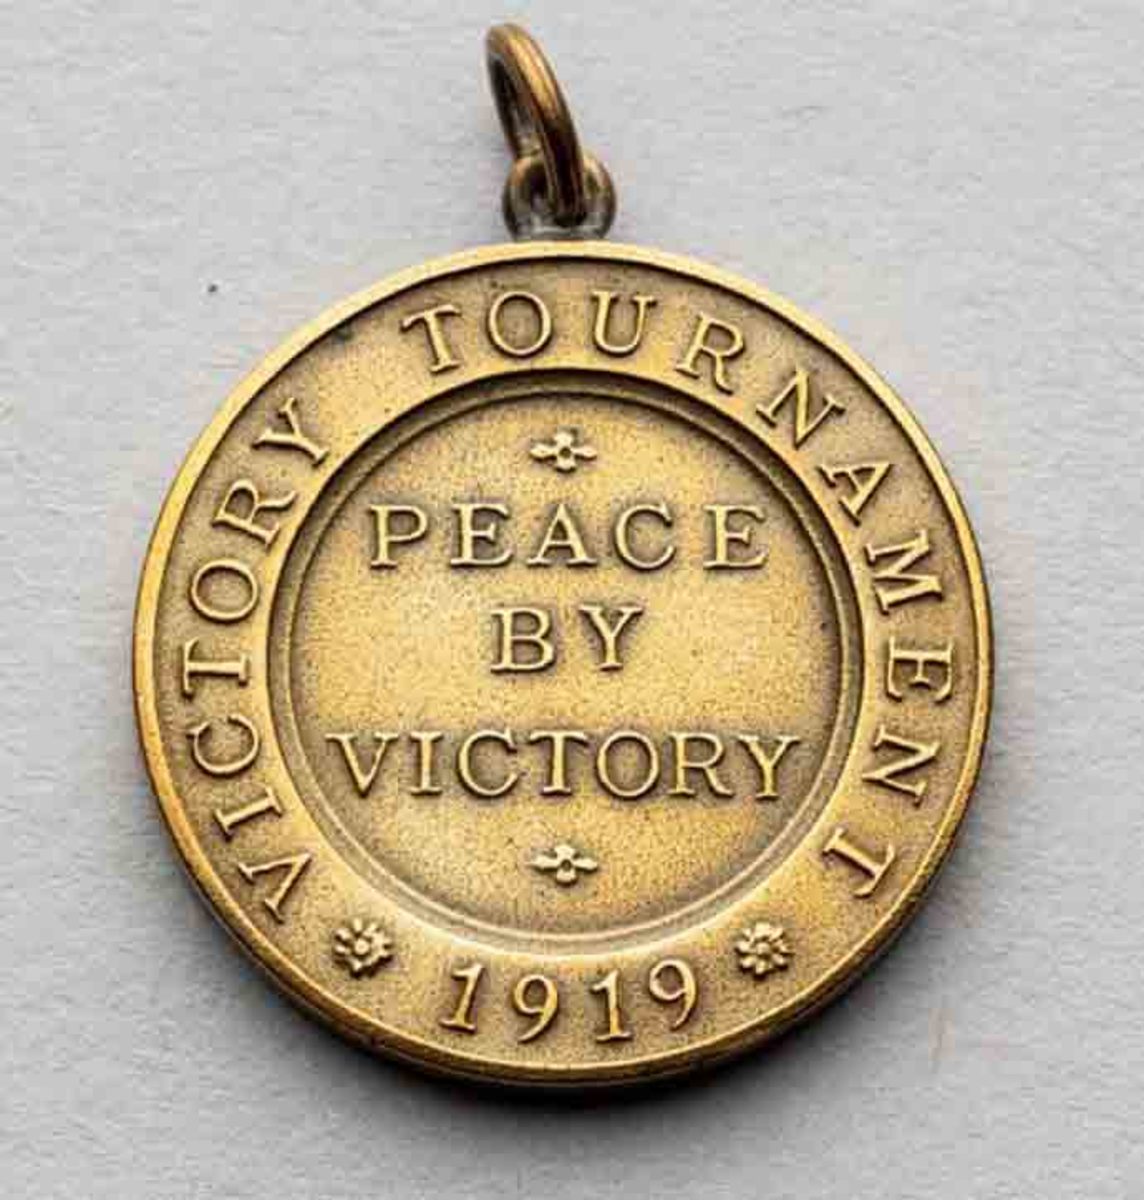 Professional Golfers Association Victory medal from 1919